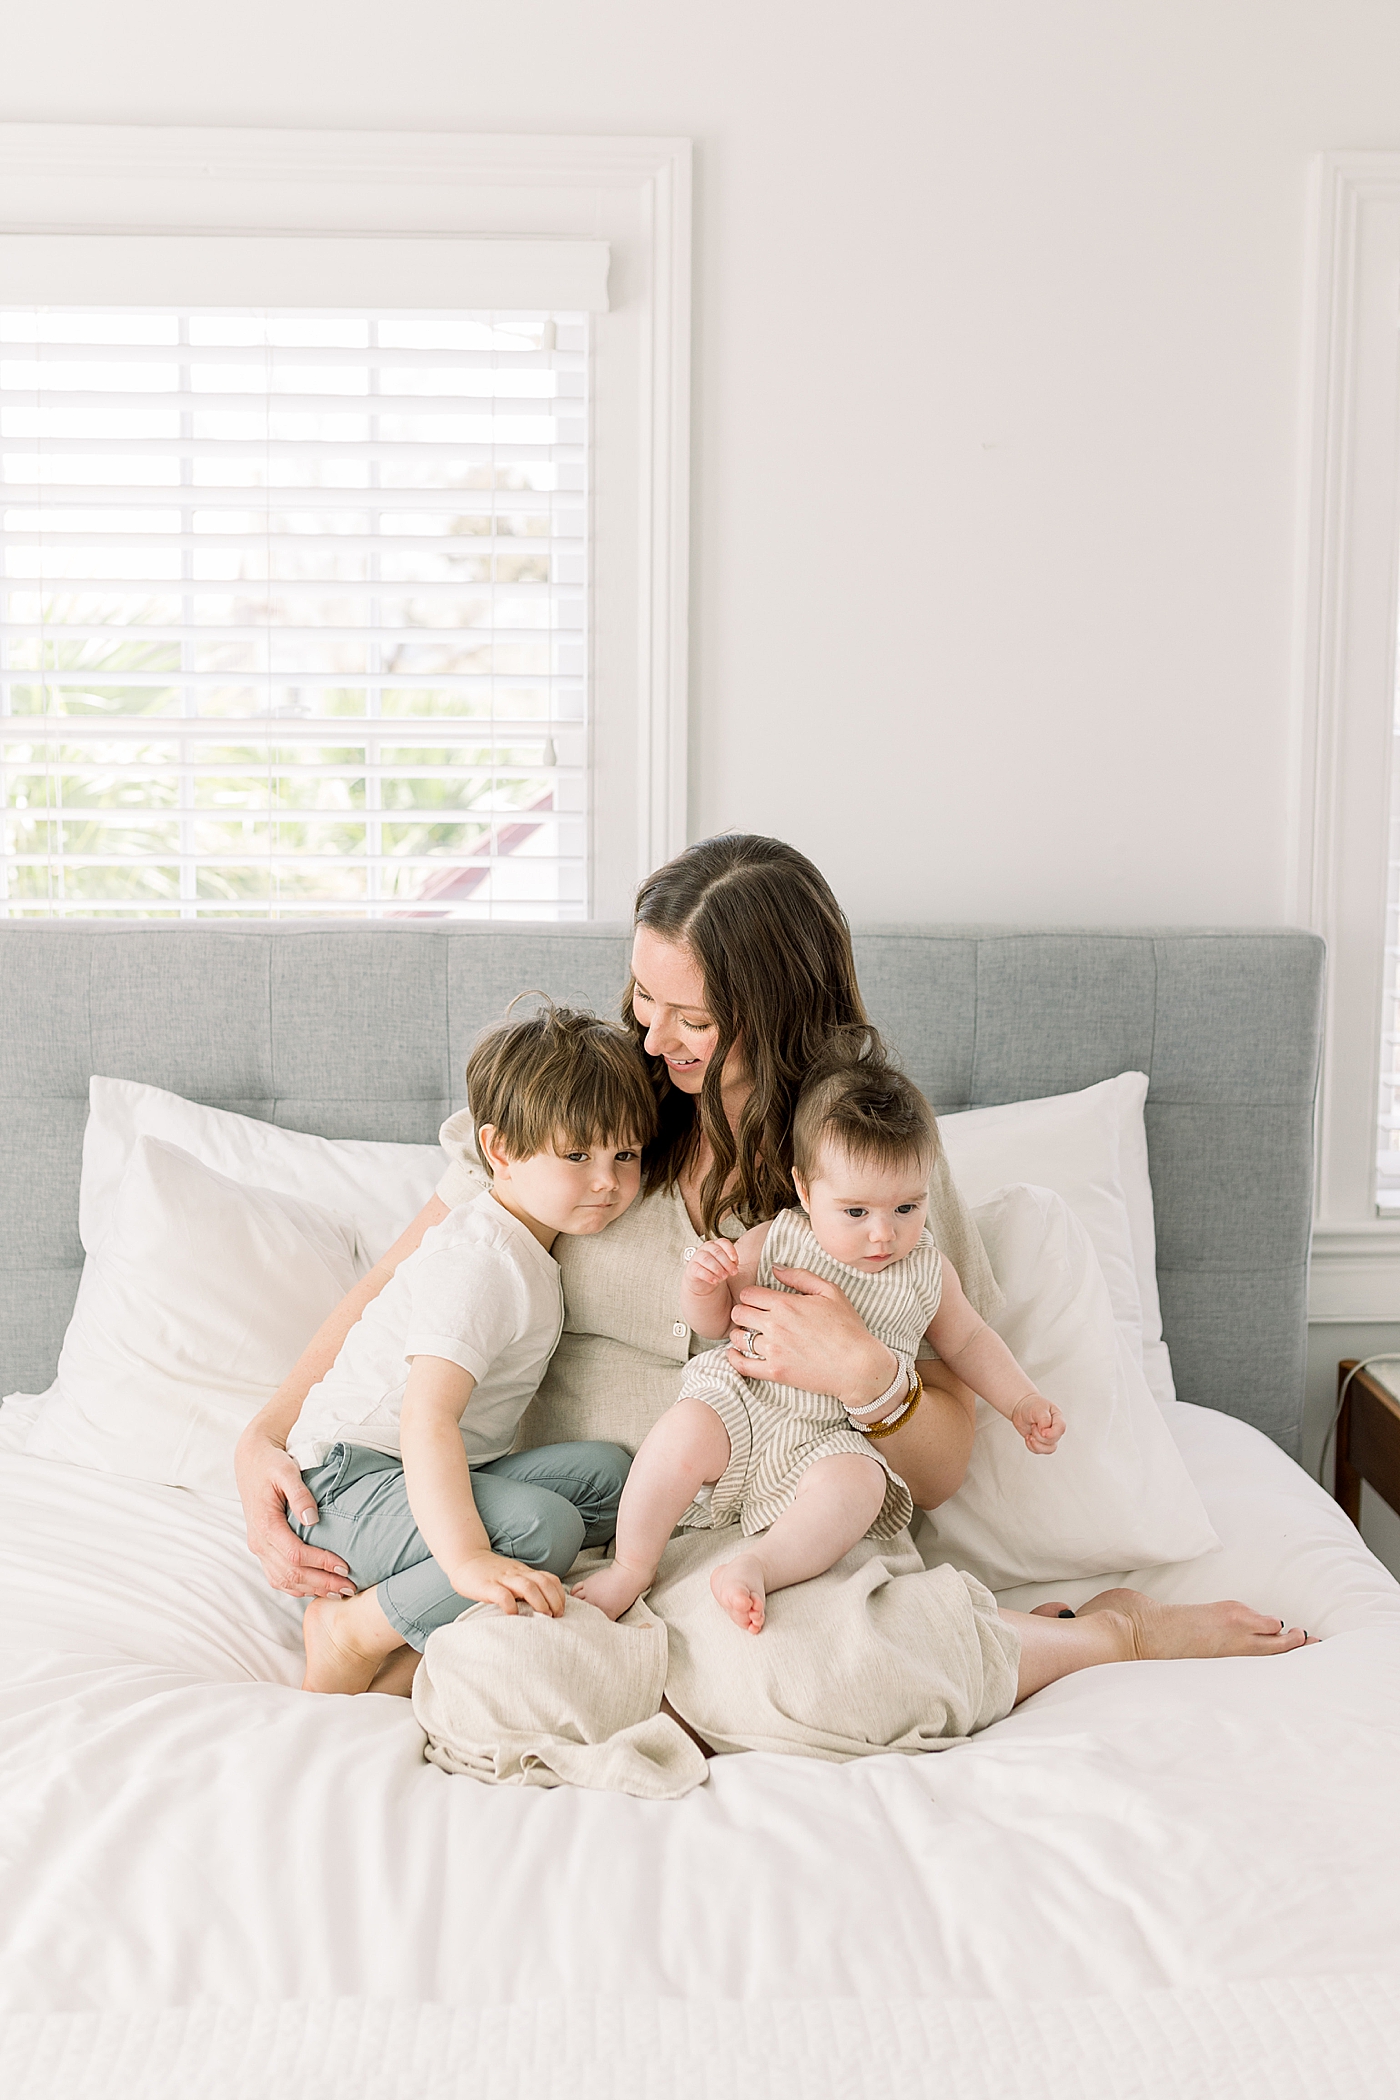 Mother sitting up in bed holding her two children | Image by Caitlyn Motycka 